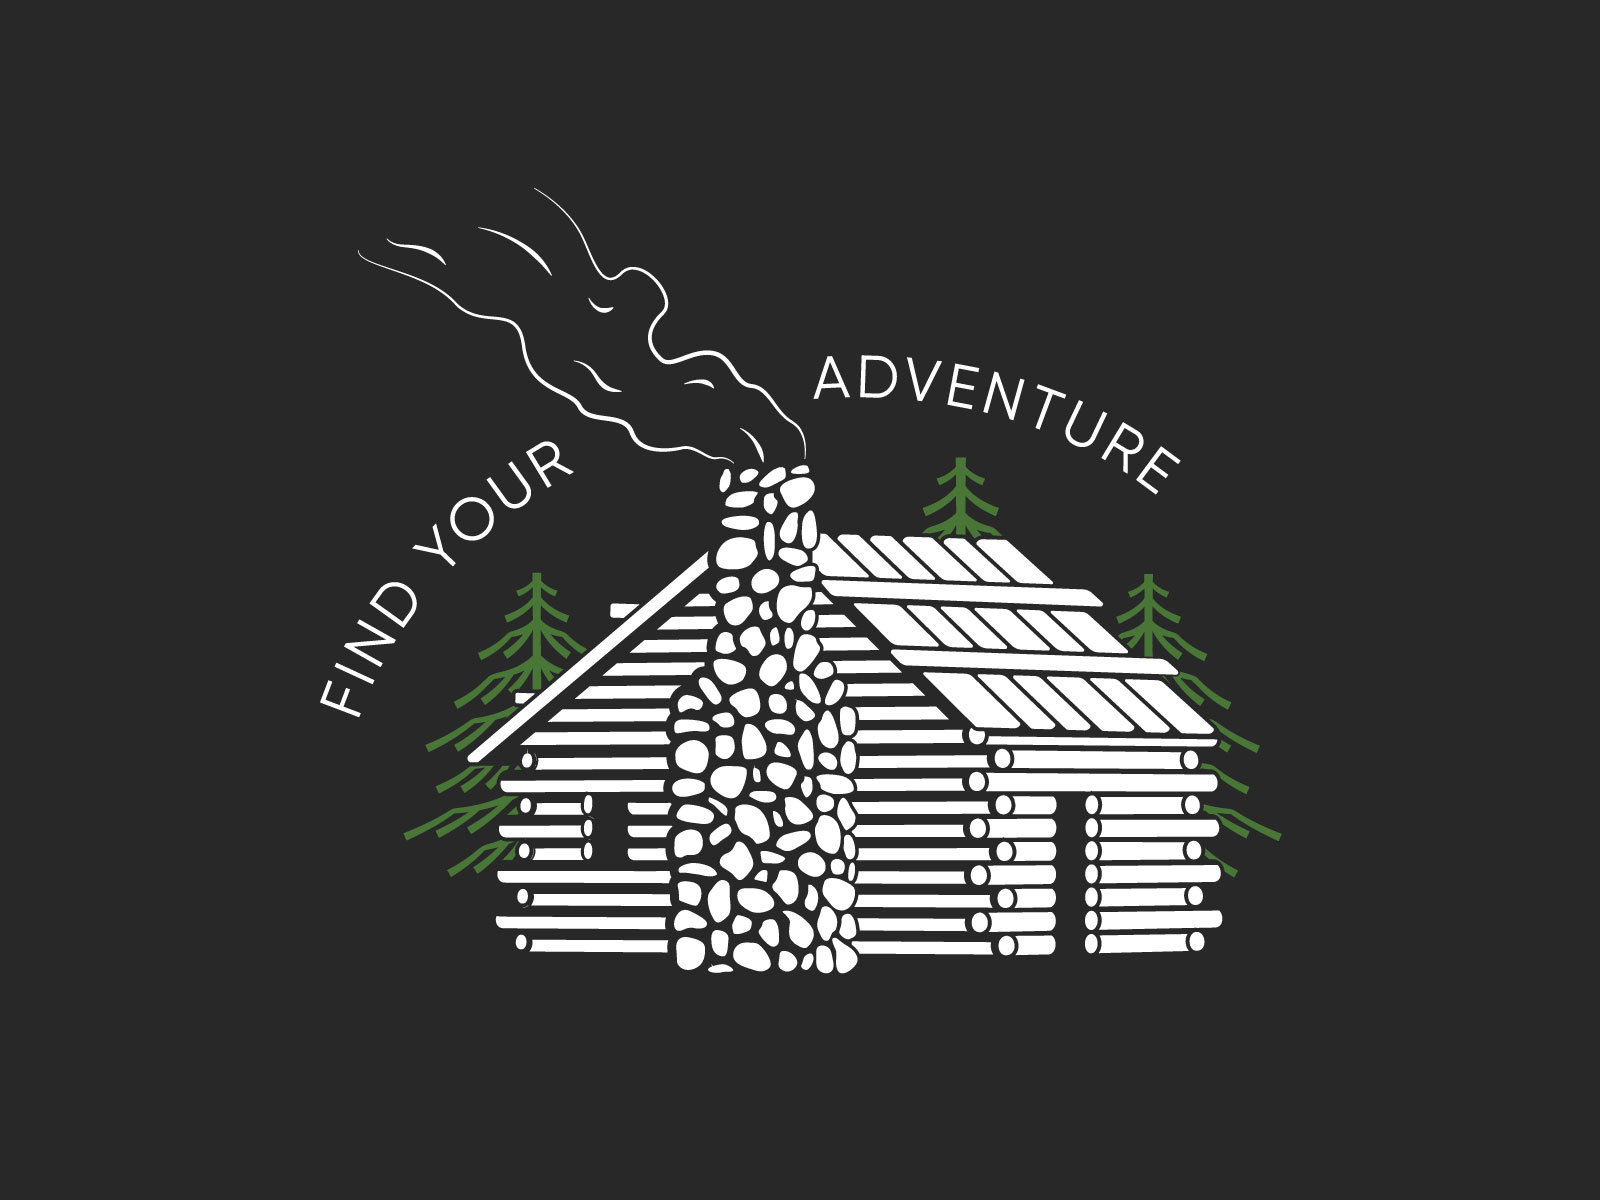 Find Your Adventure... In the Woods 2-colour apparel cabin design graphic design graphic tee illustration linework nature outdoor pinetree pioneer retro screenprint vintage vintage illustration